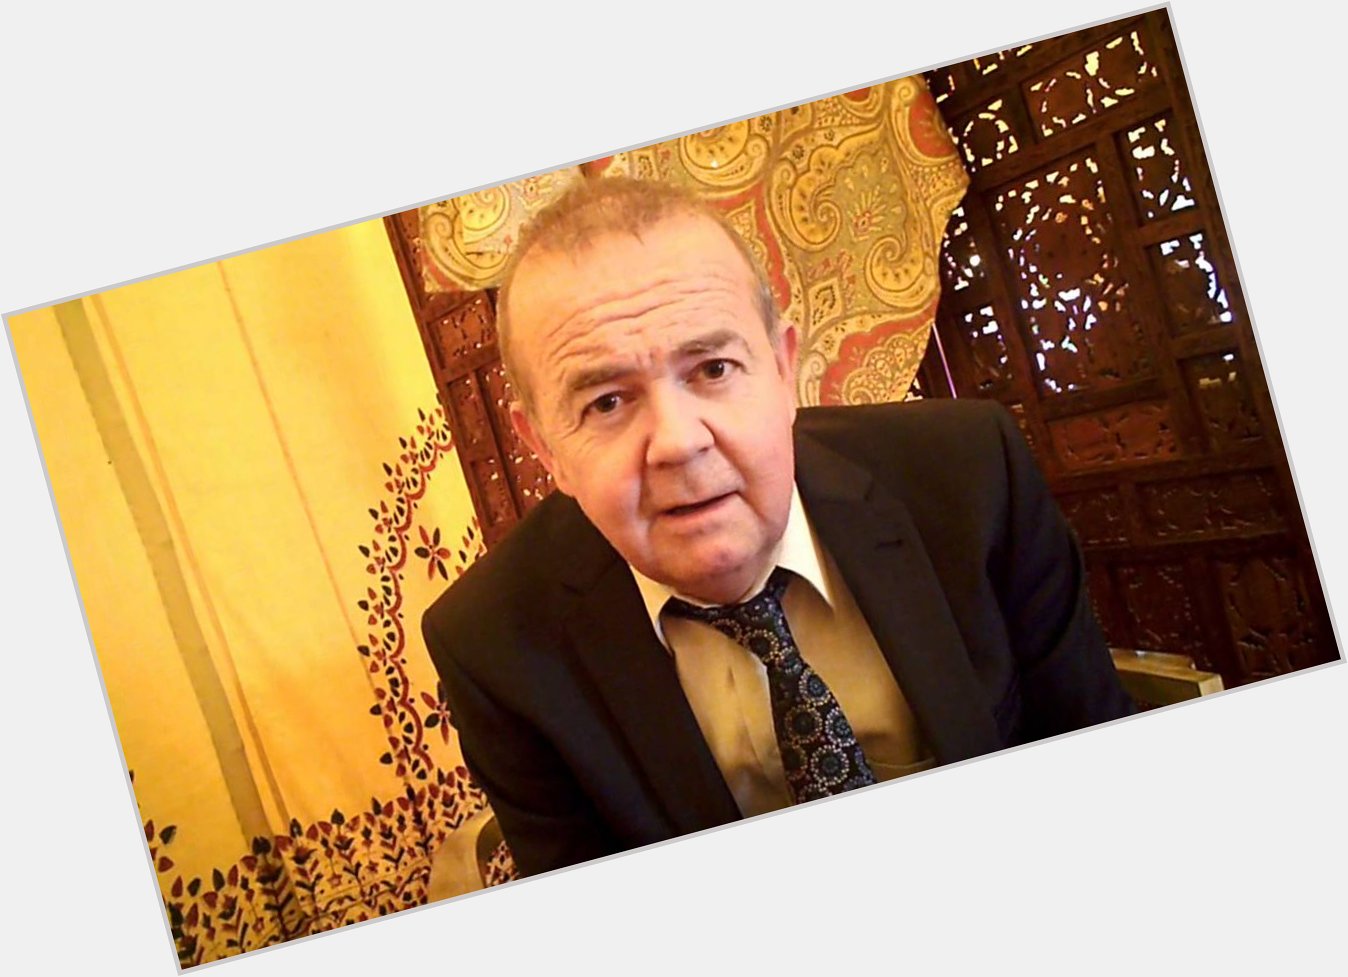 A happy 57th birthday today to Ian Hislop. 